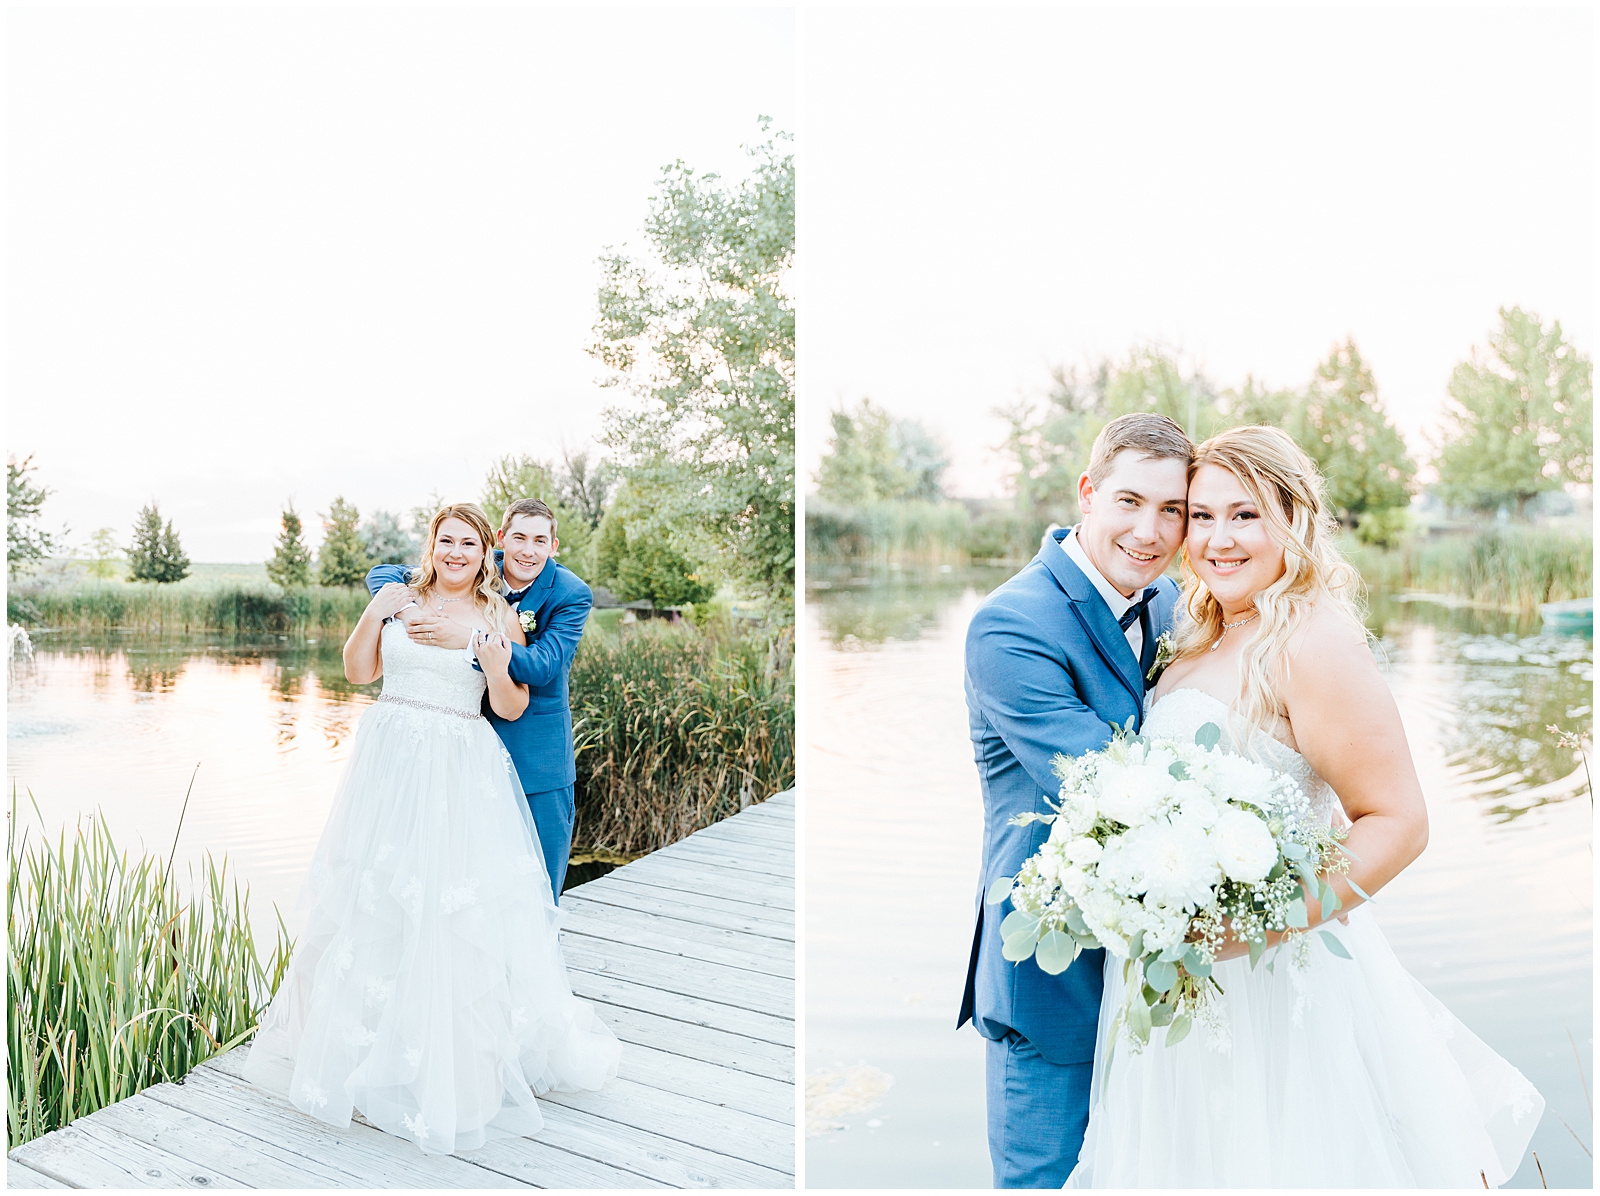 Bride and Groom Portraits at Golden Hour at Creekside Affair Wedding